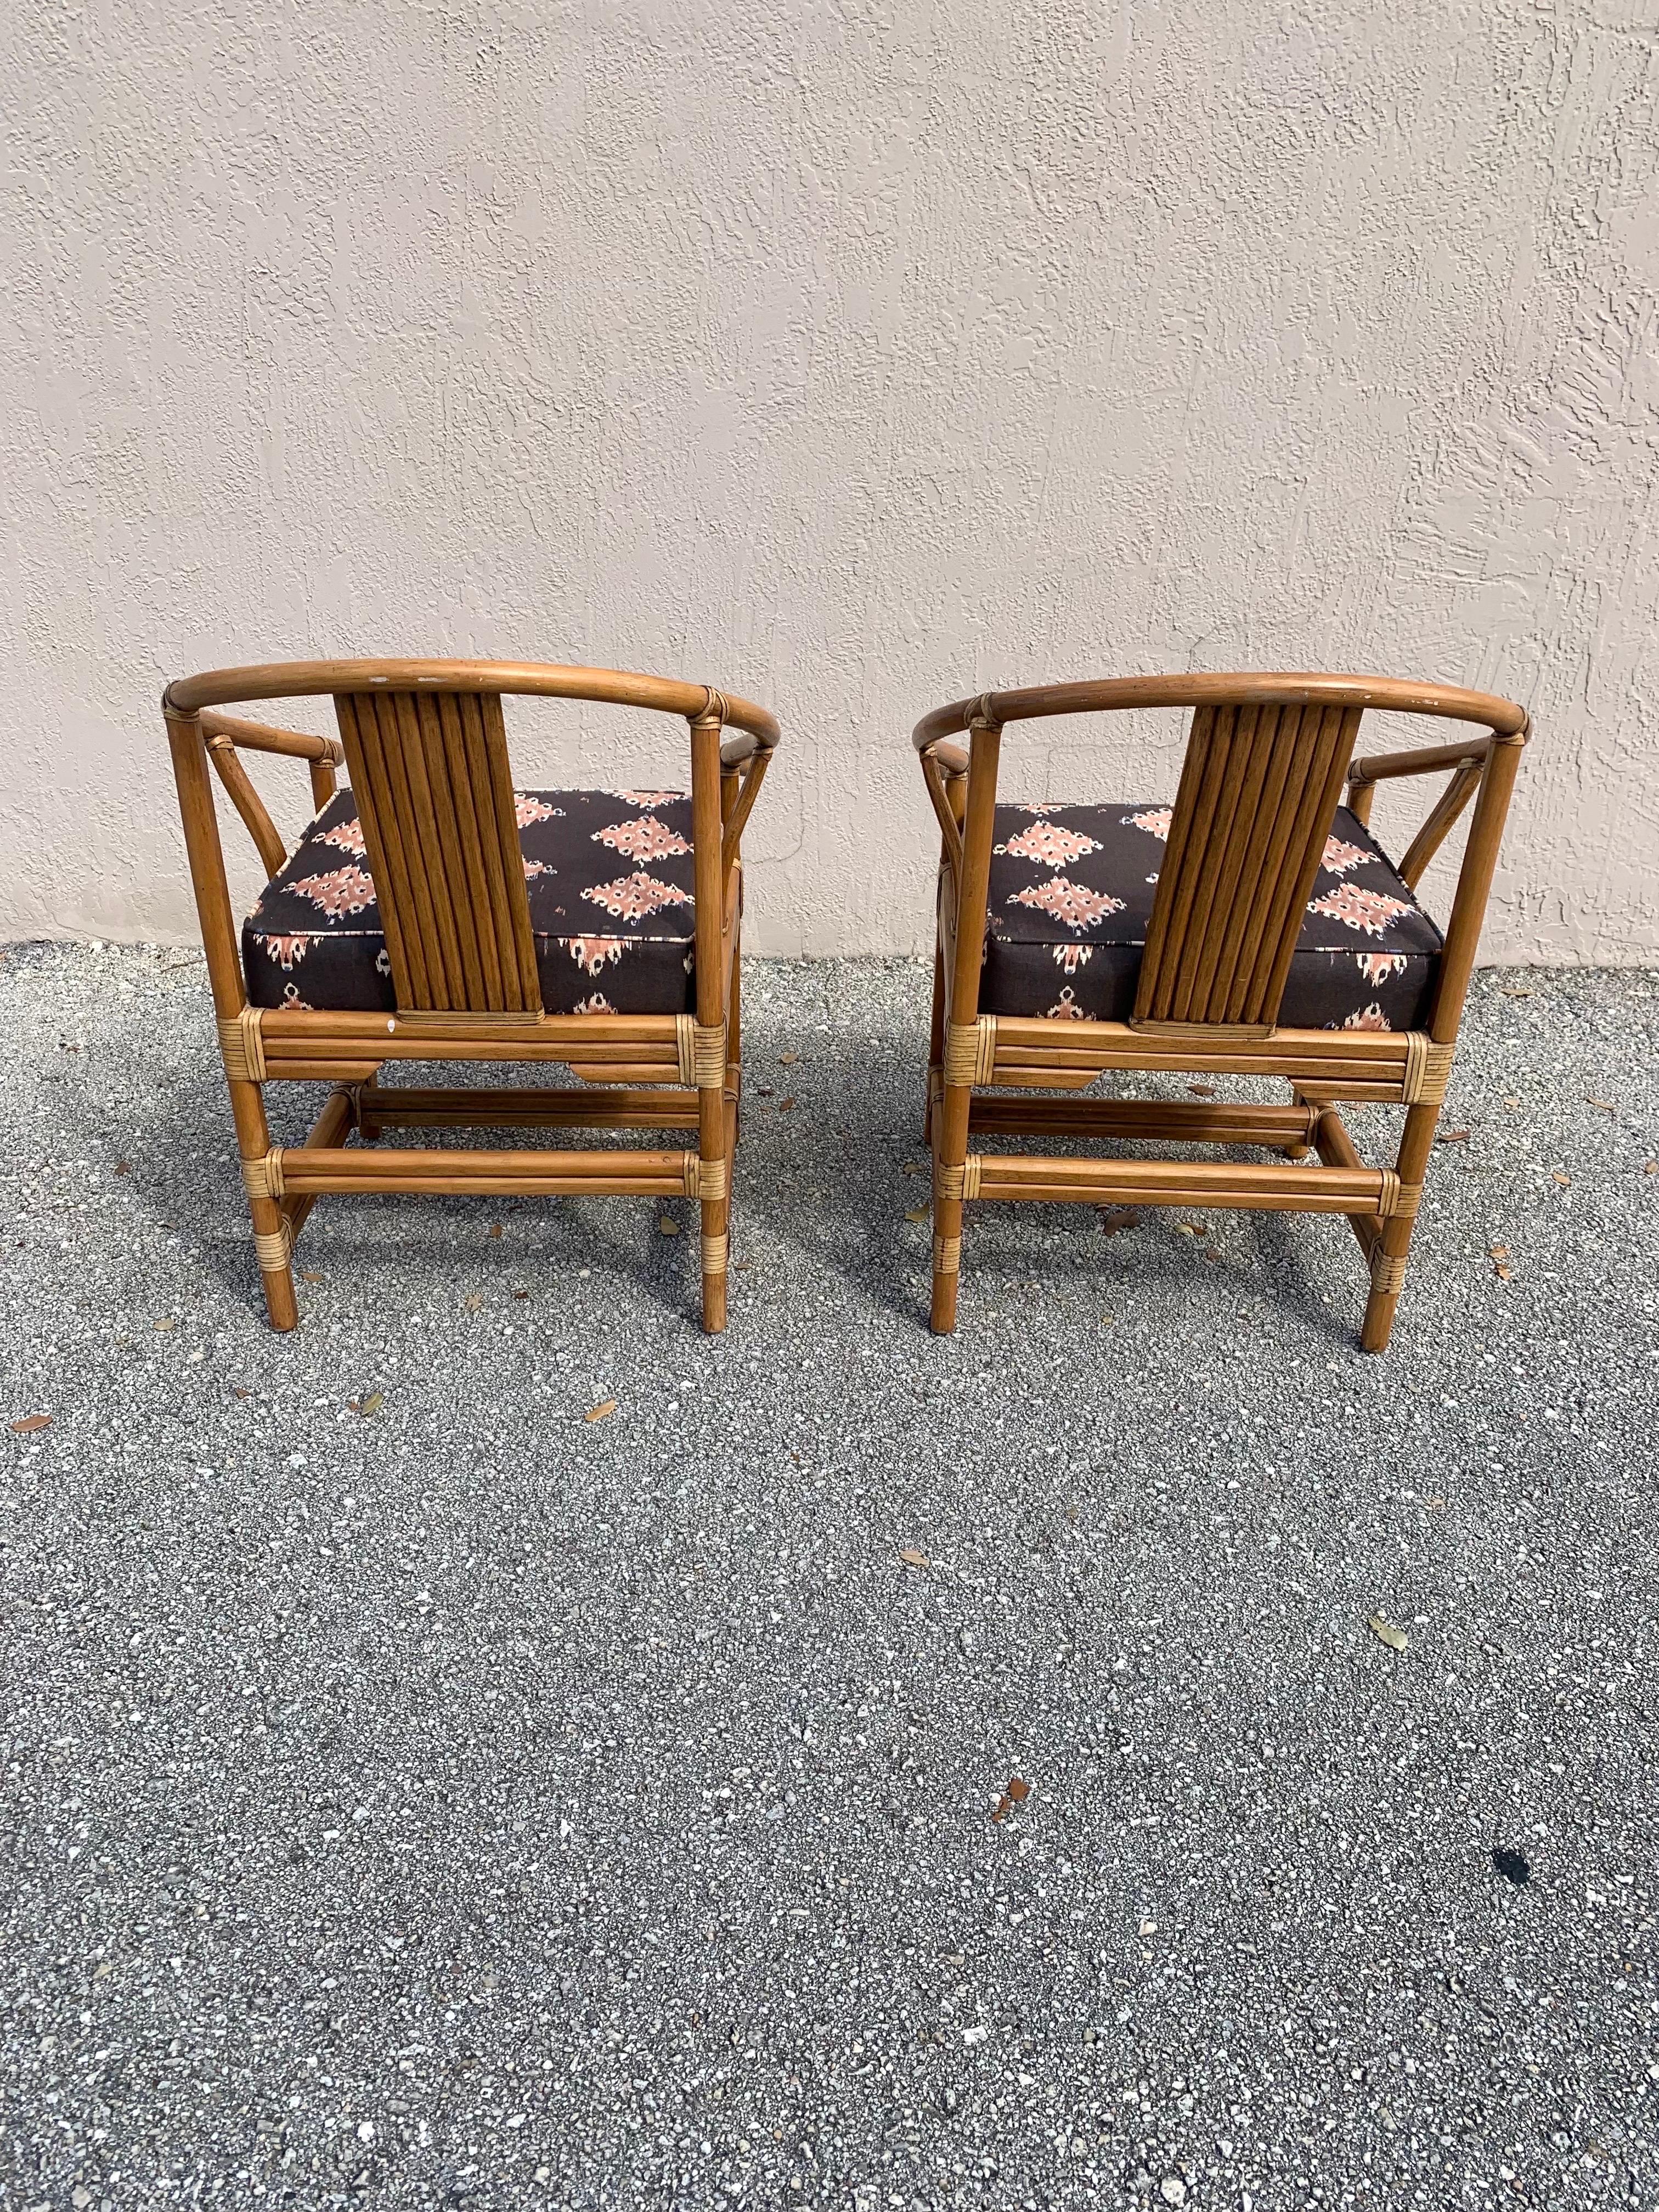 20th Century Vintage Organic Modern Chairs by Ficks Reed For Sale